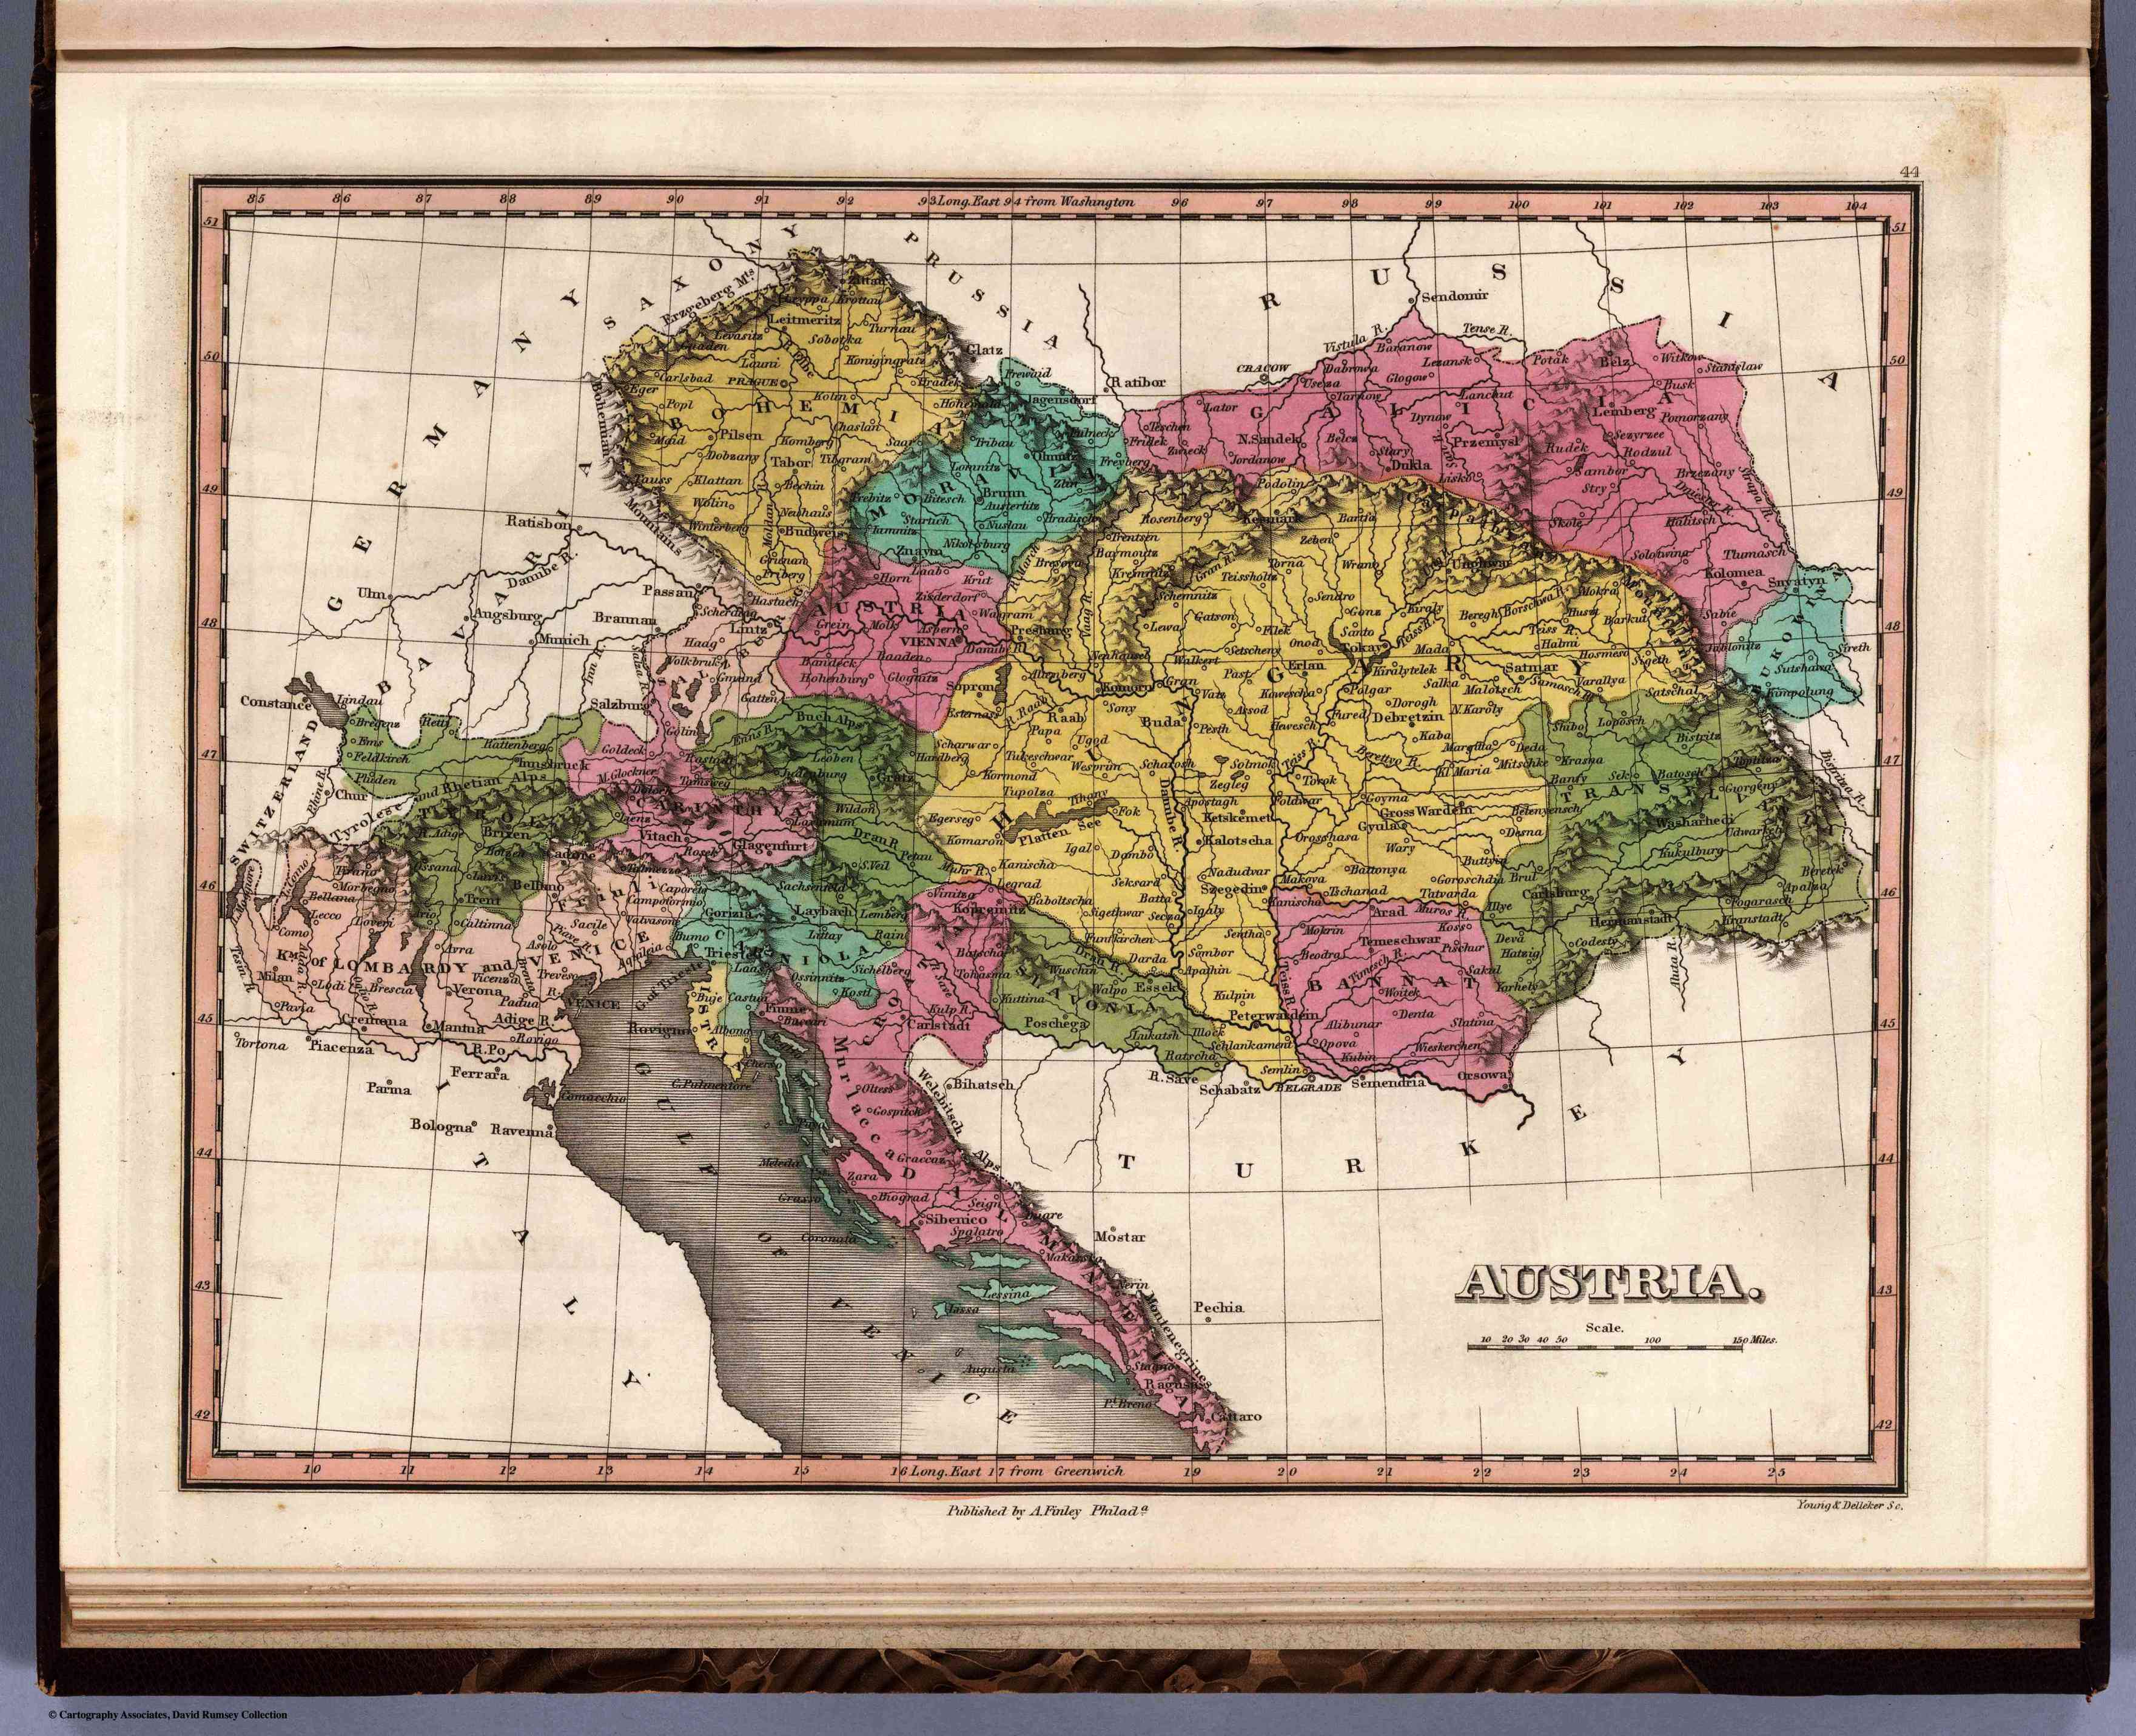 L'austria negli anni '20. A New General Atlas Comprising a Complete Set of Maps, representing the Grand Divisions Of The Globe with the several Empires, Kingdoms, and States in the World. Published by Anthony Finley 1824  